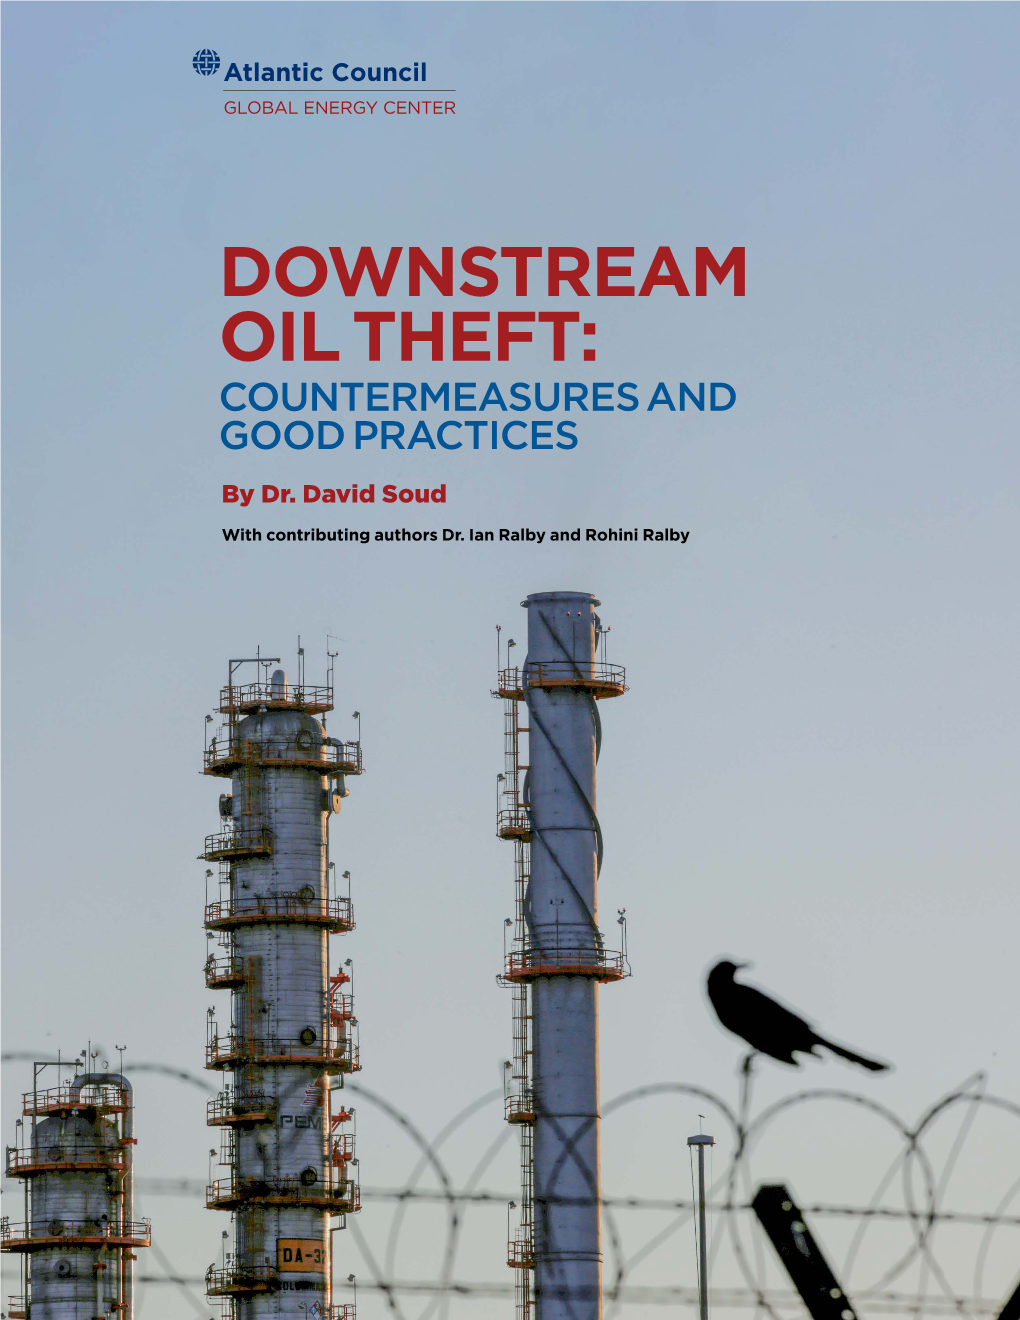 Downstream Oil Theft: Countermeasures and Good Practices